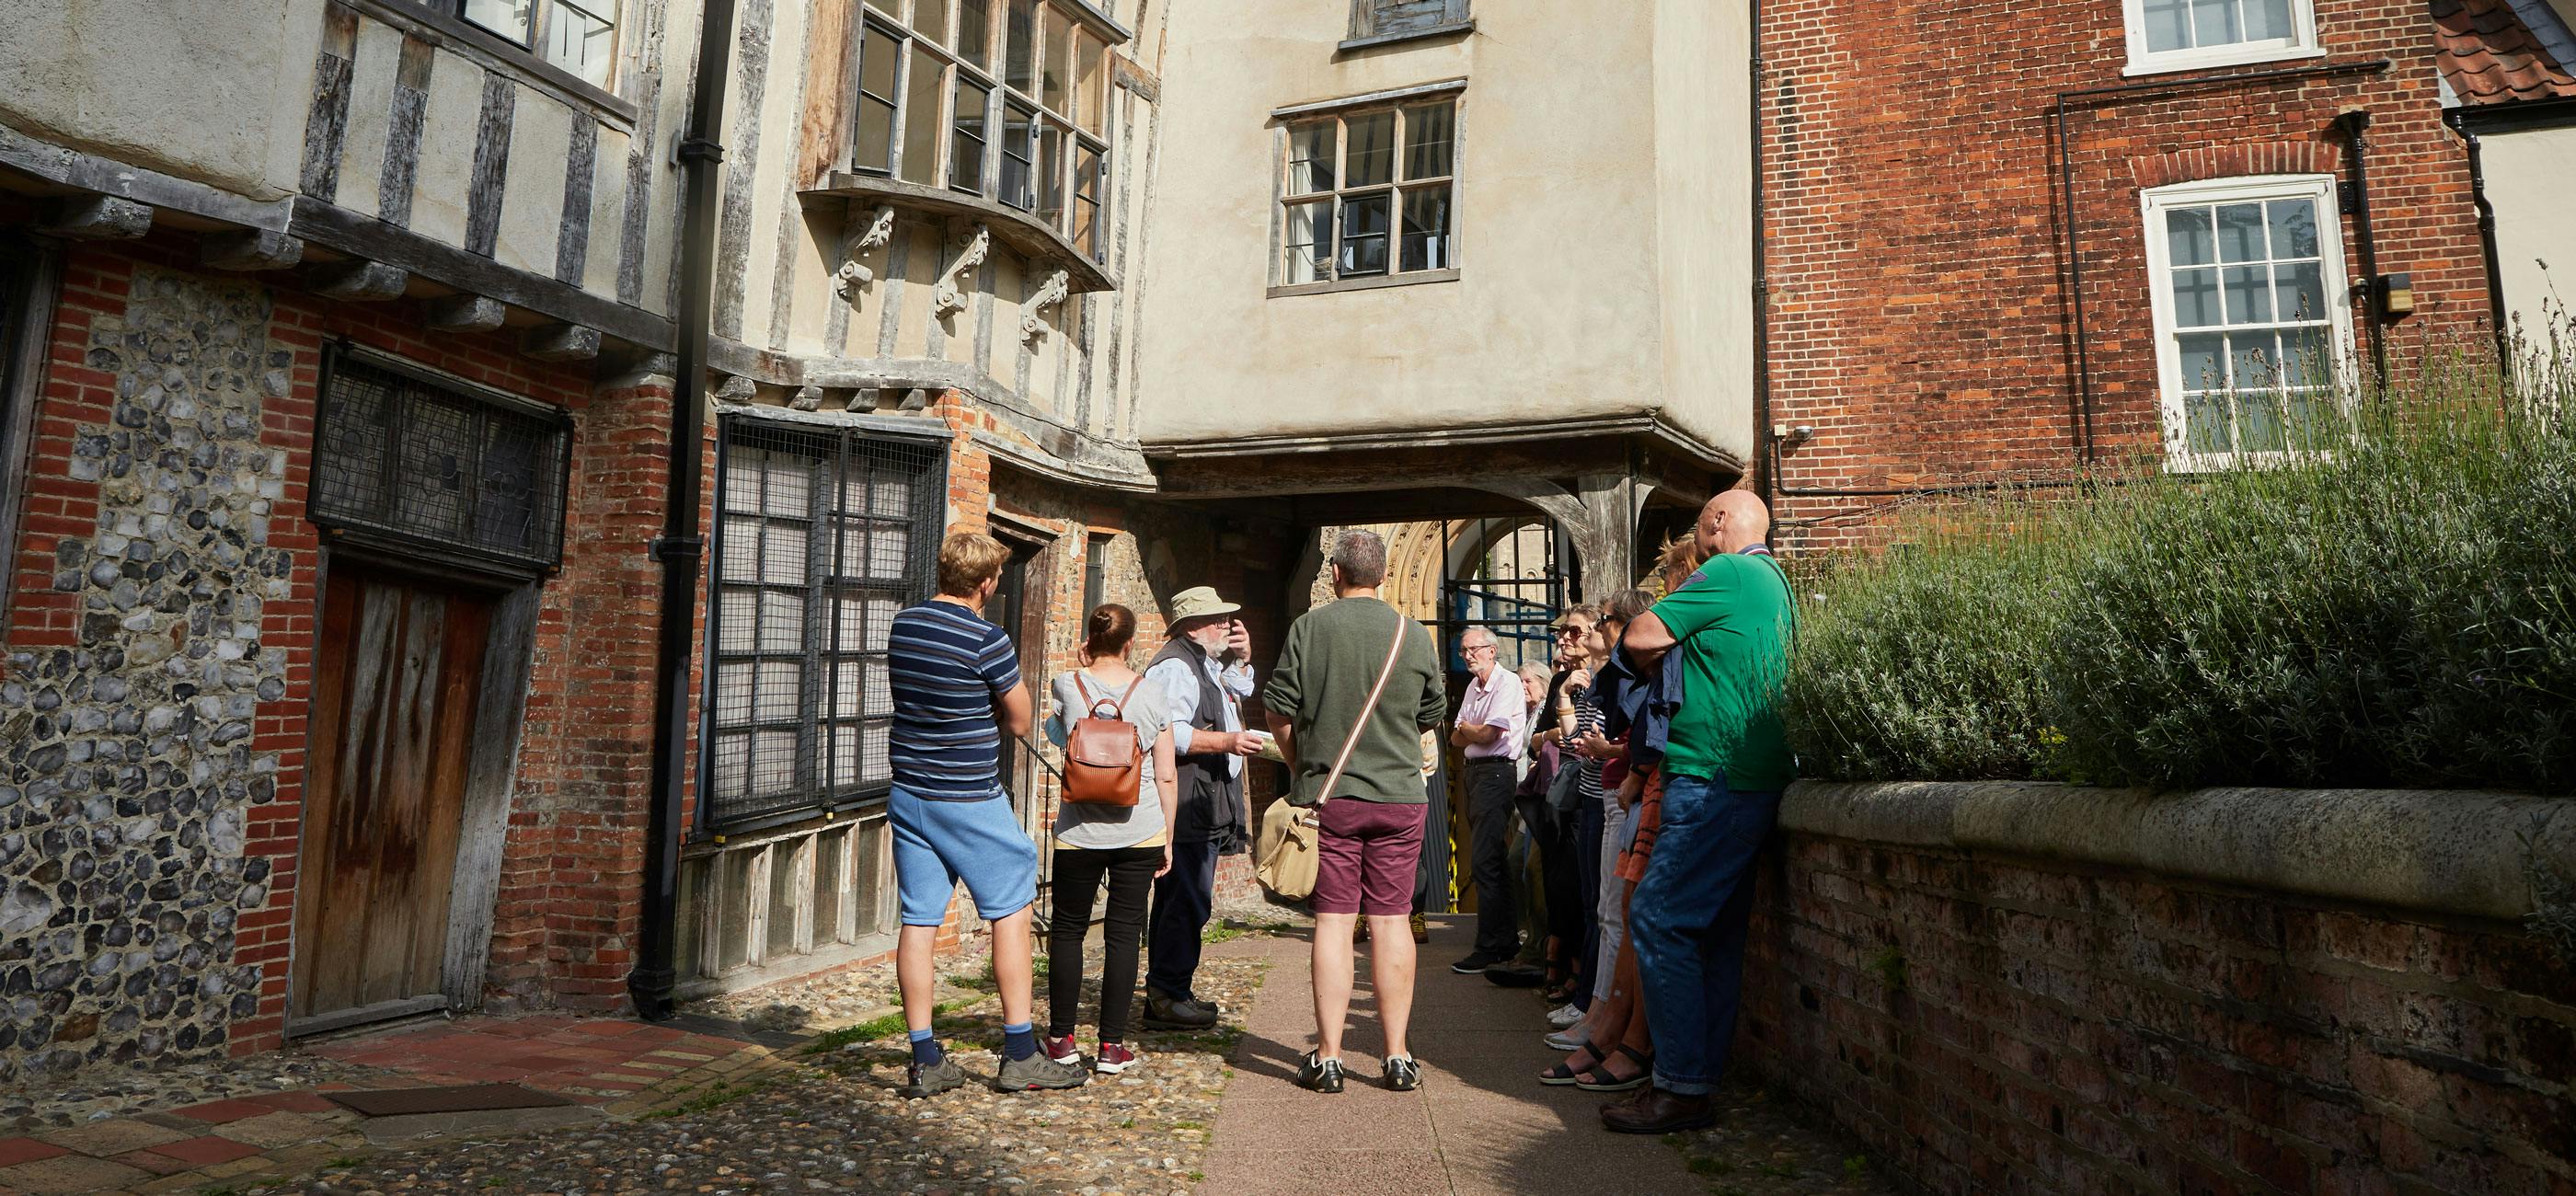 A group of people stand listening to a talk guide next to a Tudor building.